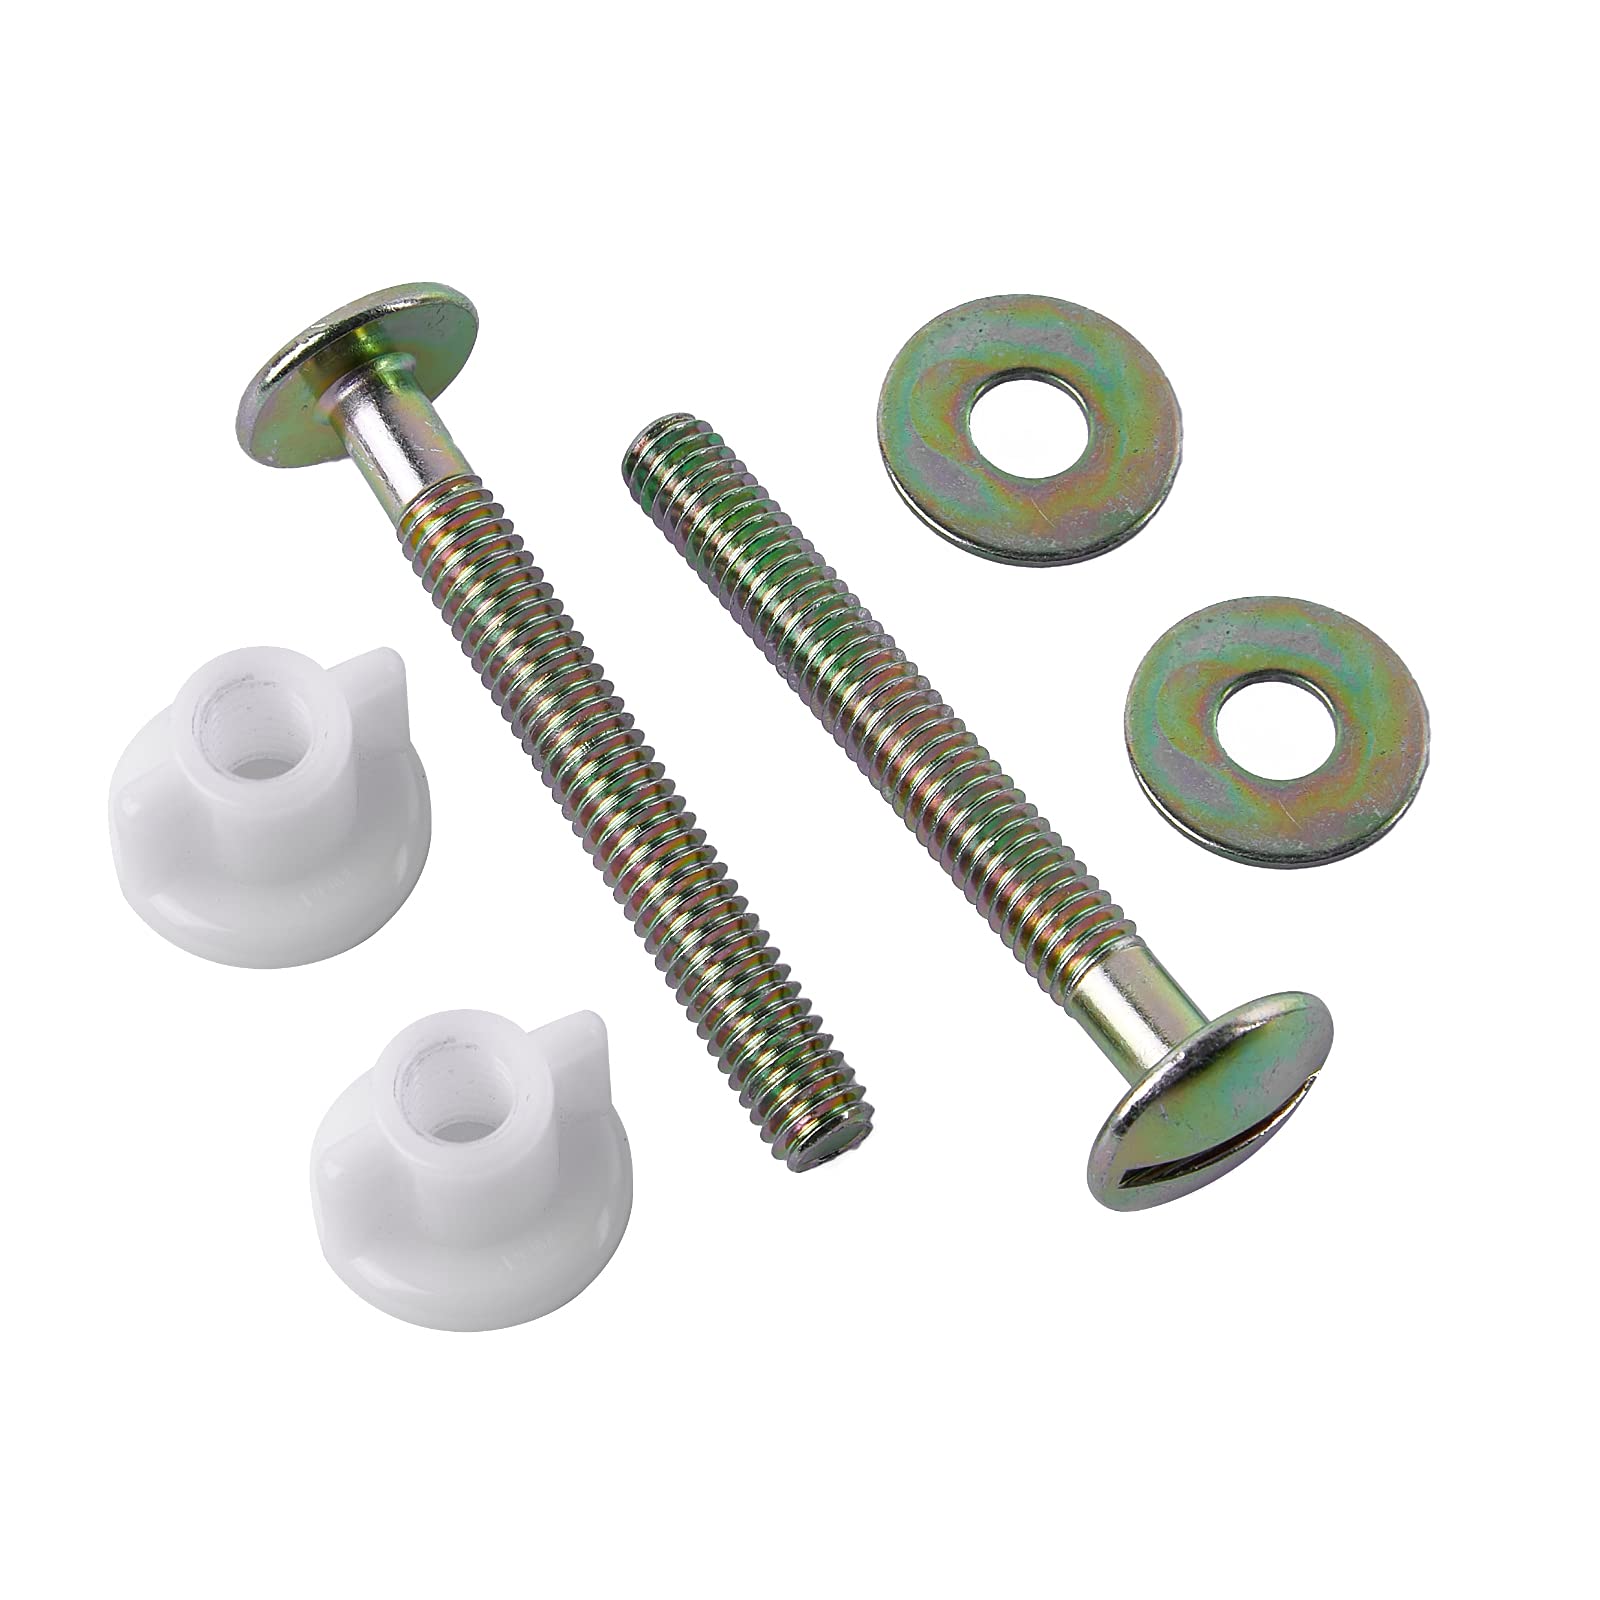 Universal Toilet Seat Screws, 2Packs Metal Toilet Seat Hinge Bolts and Screws, 3 Inch Steel Toilet Seat Bolts, Washers and Plastic Nuts, Replacement Parts for Top Mount Toilet Seat Hinges